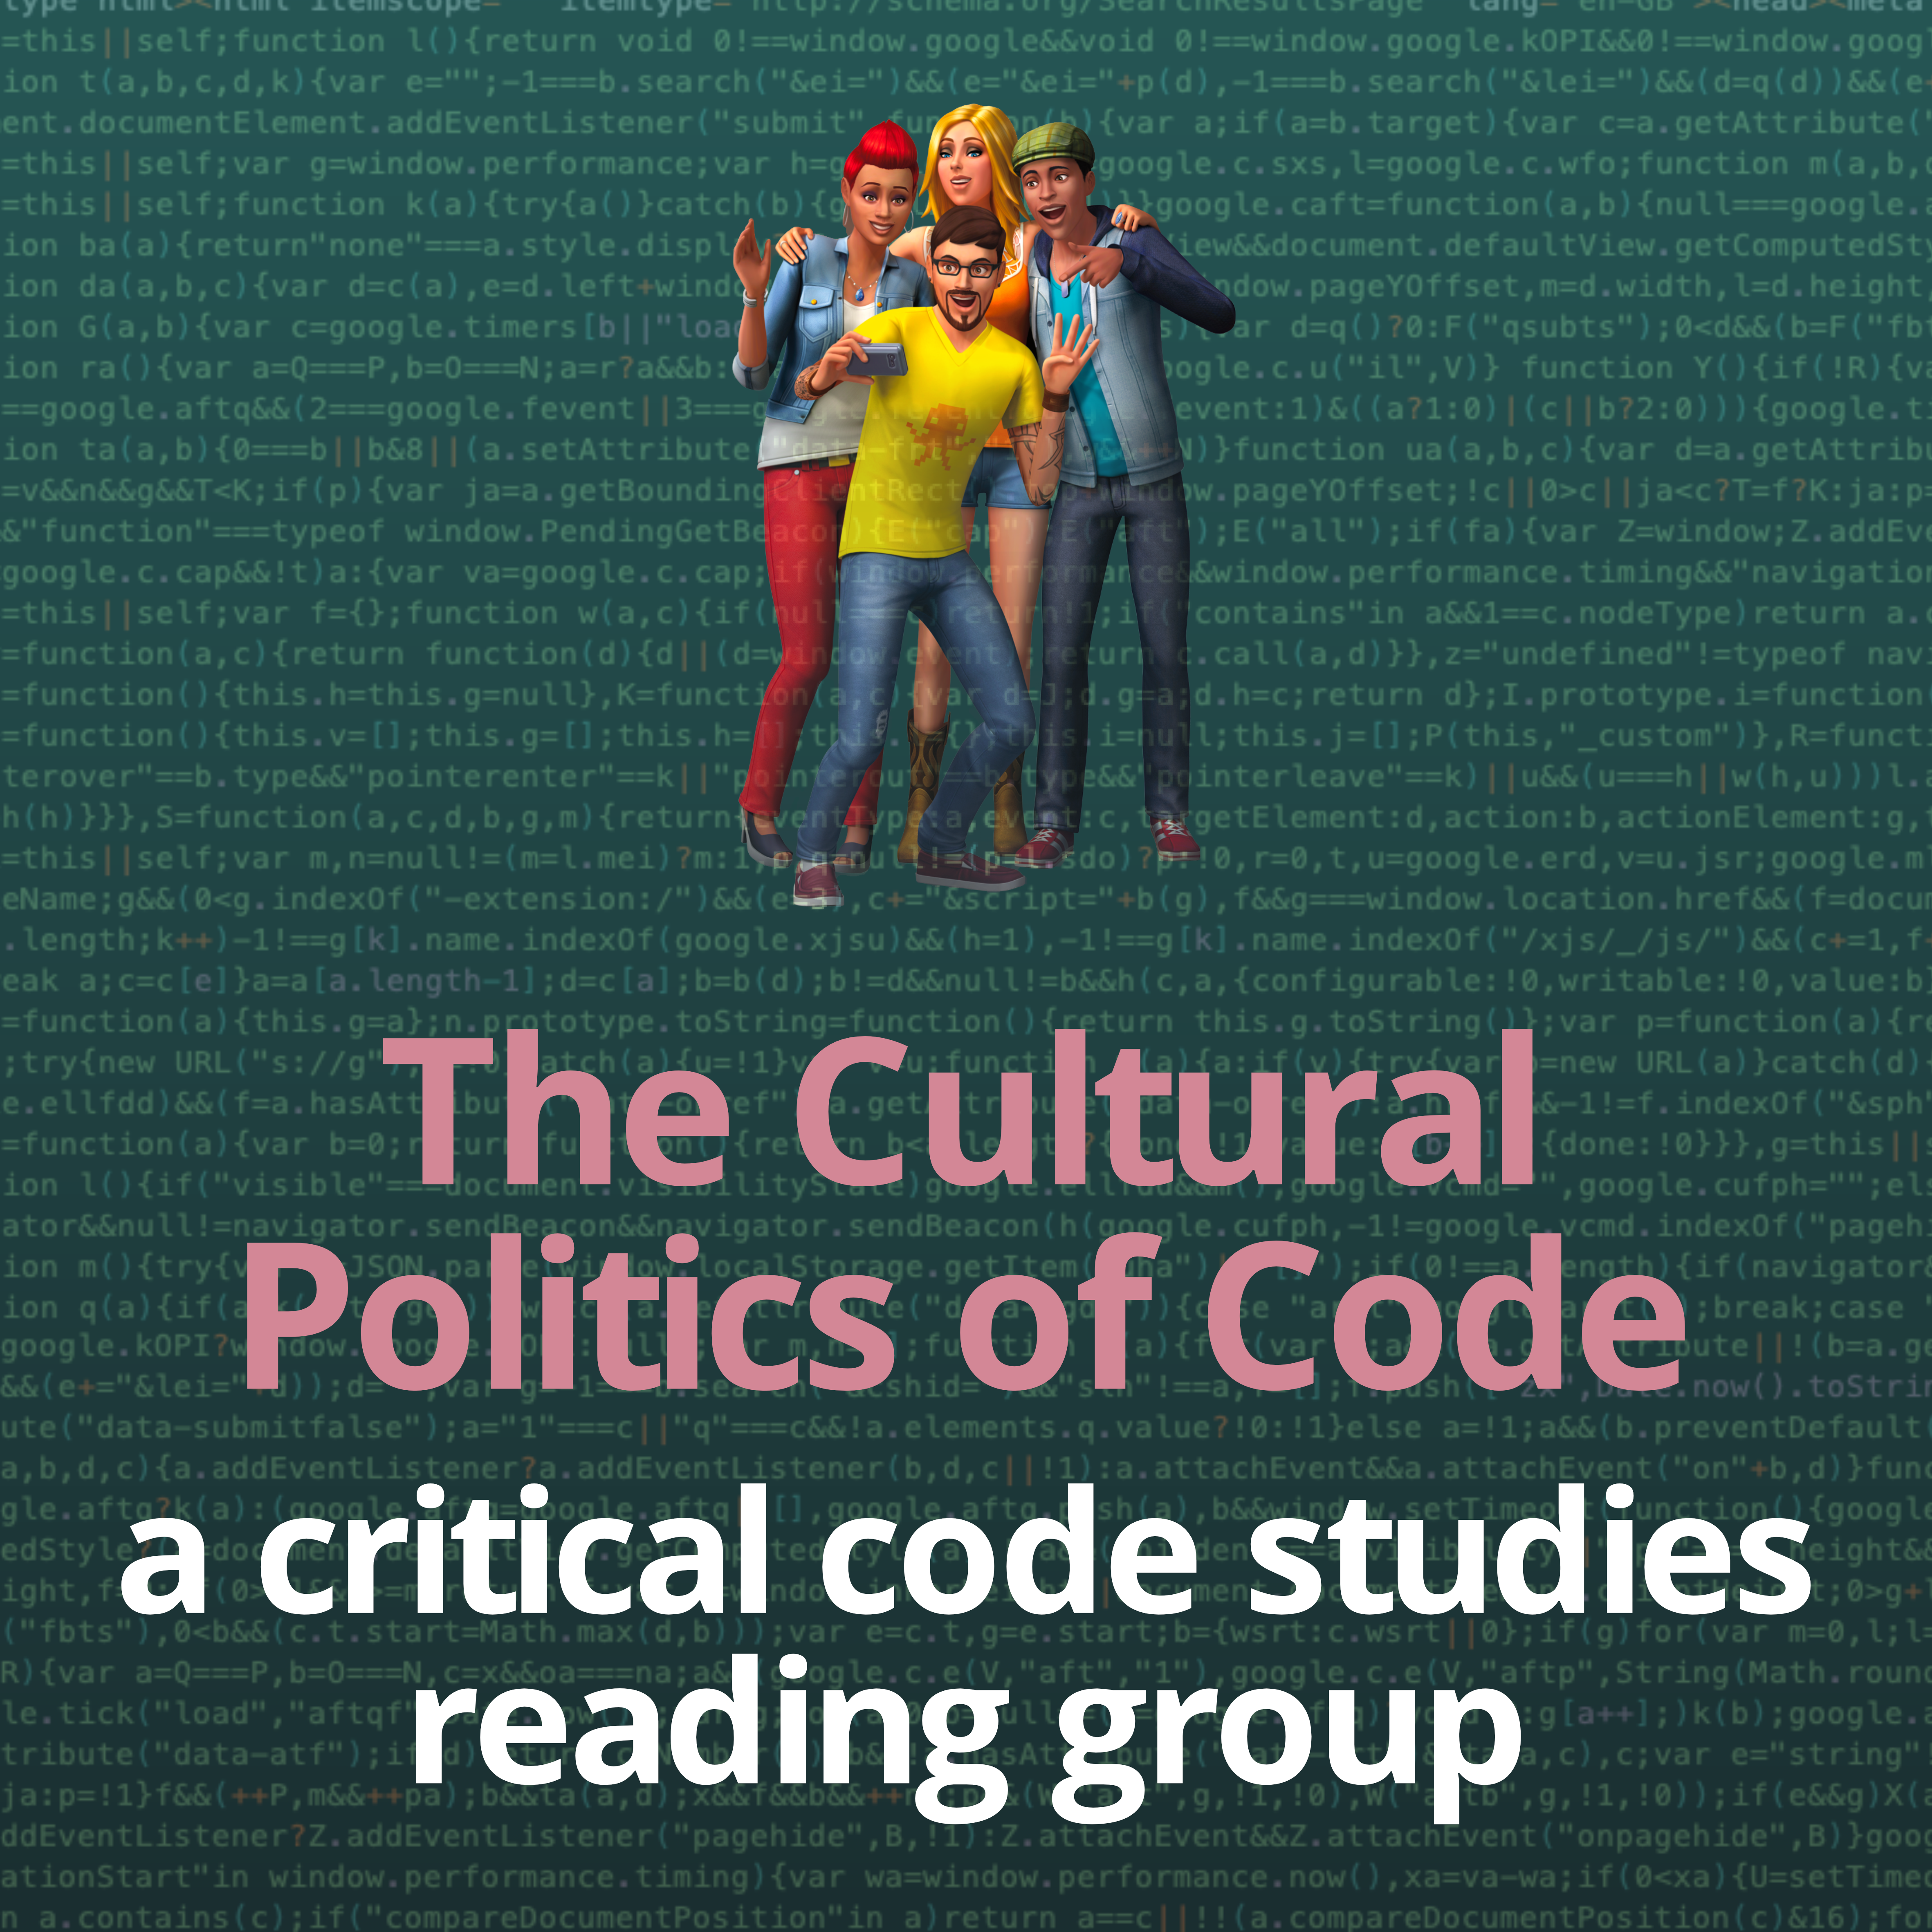 The Cultural Politics of Code: A Critical Code Studies Reading Group